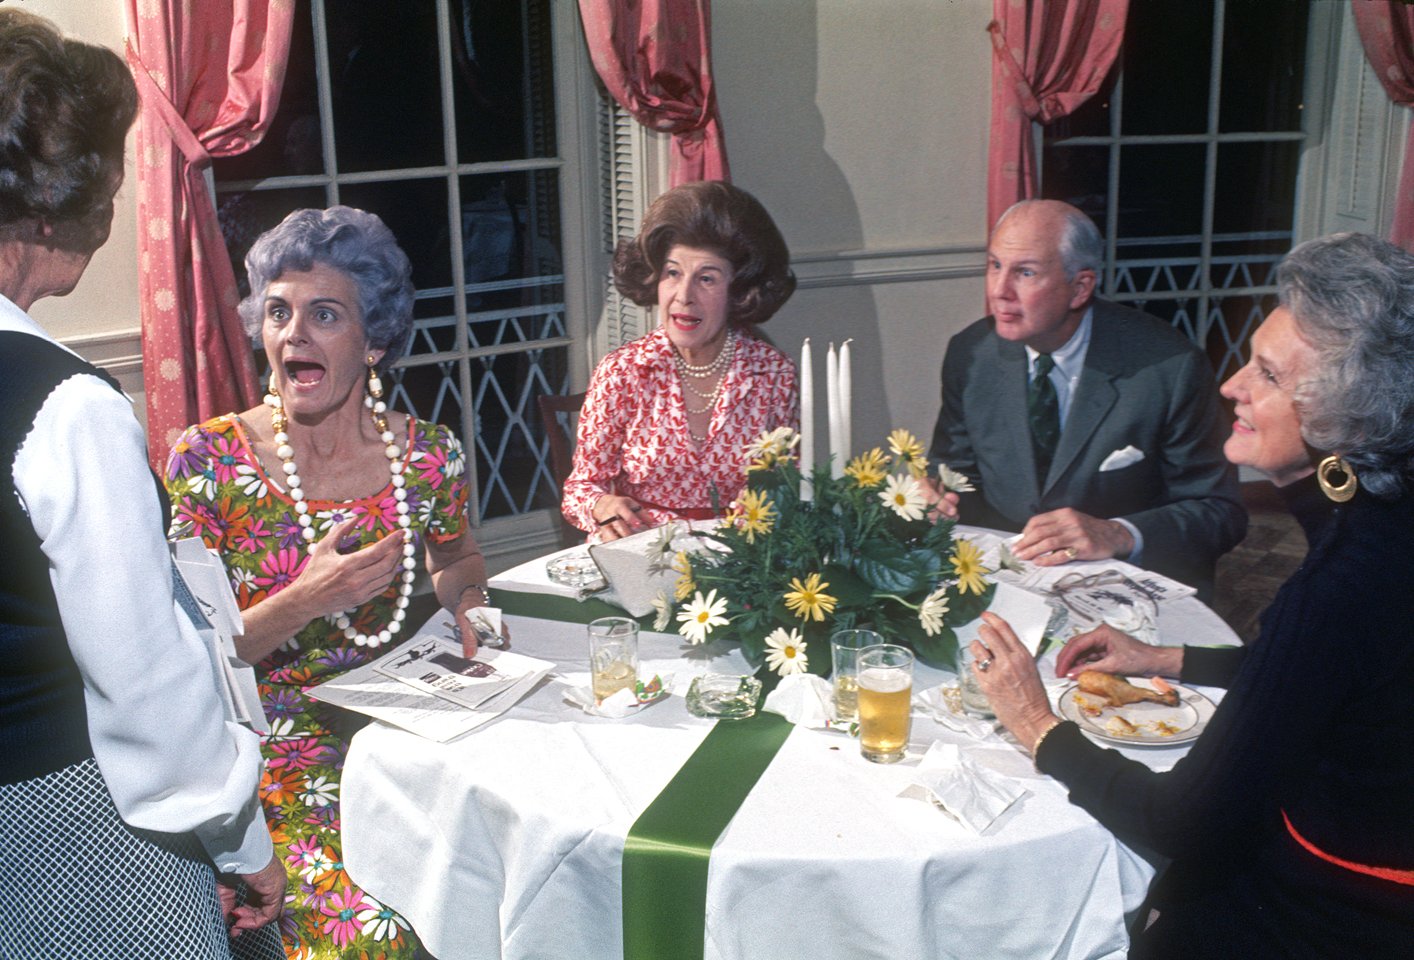  Atlanta Steeplechase Dinner 1972 - A glamorous dinner for the Steeplechase crowd referred to as "The Best Lawn Party in Georgia. 